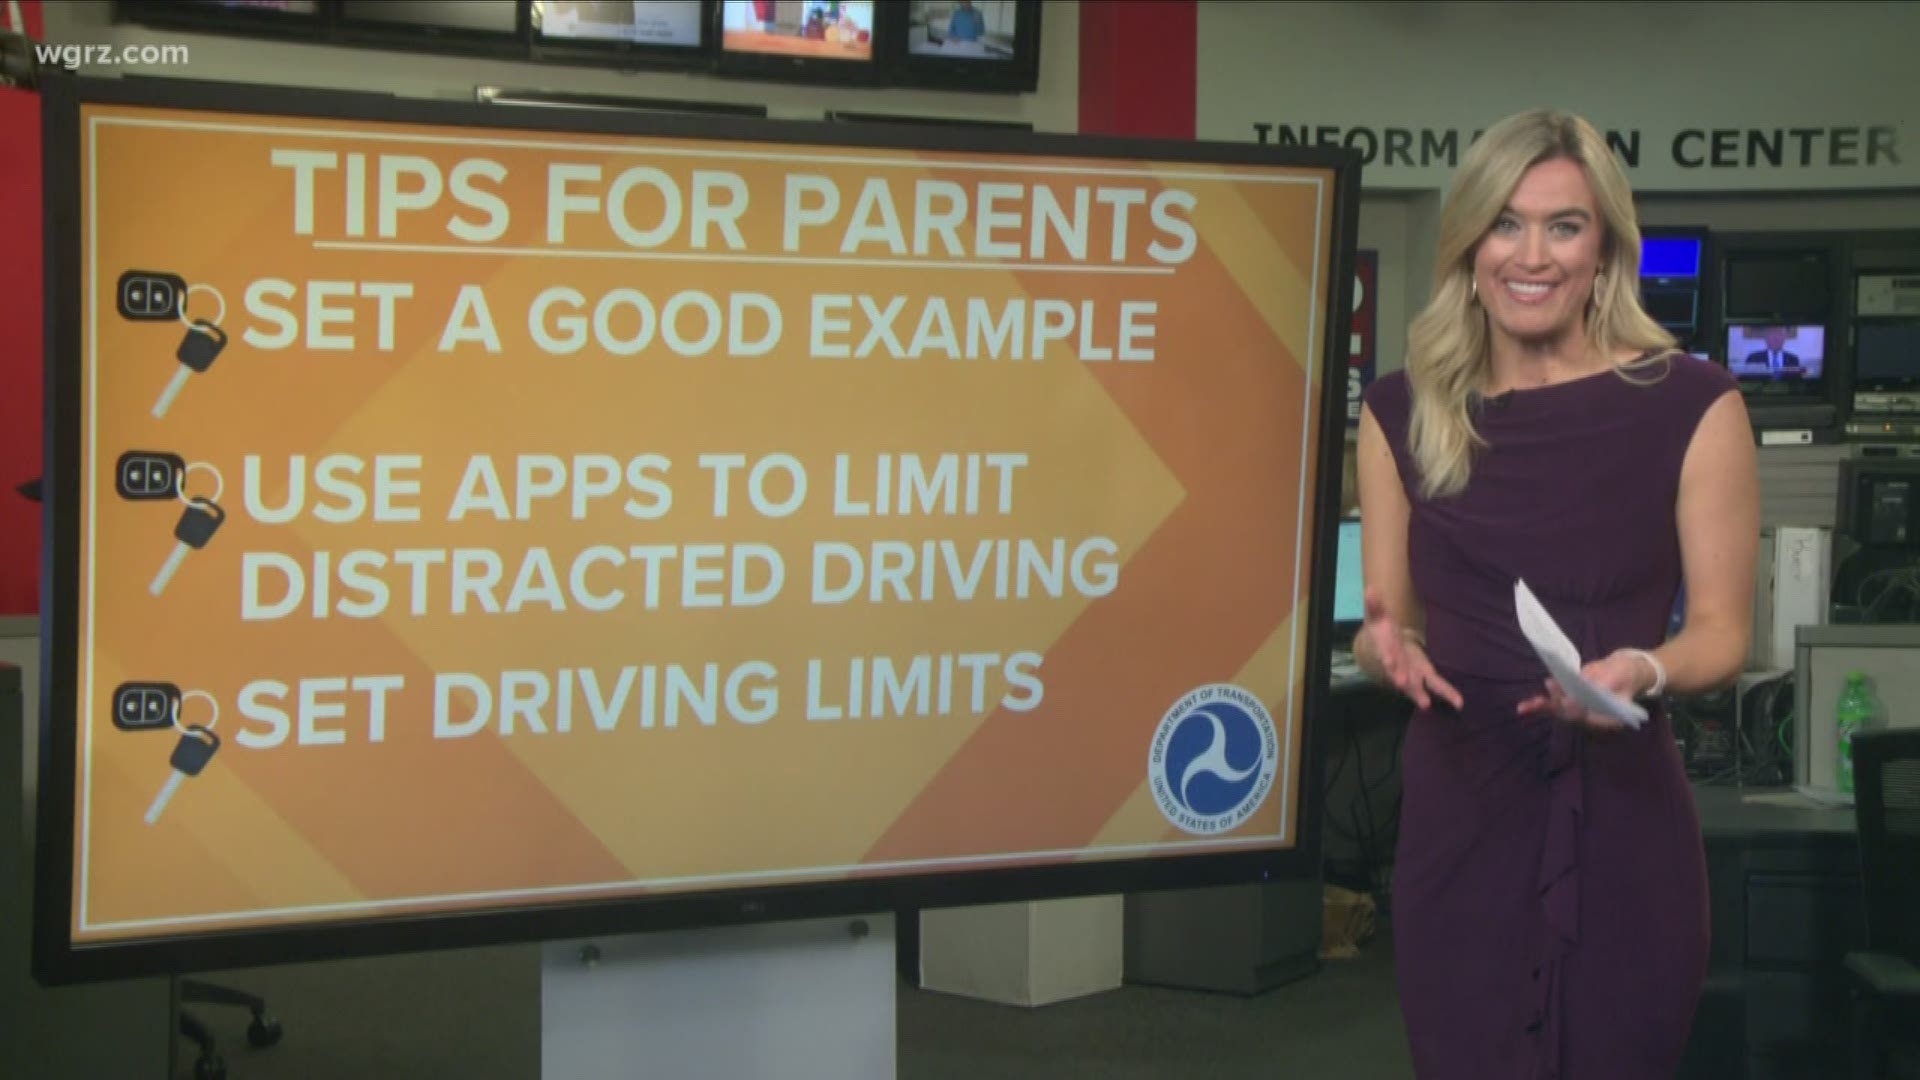 Lauren Hall shared some important information and tips in honor of National Teen Driver Safety Week.